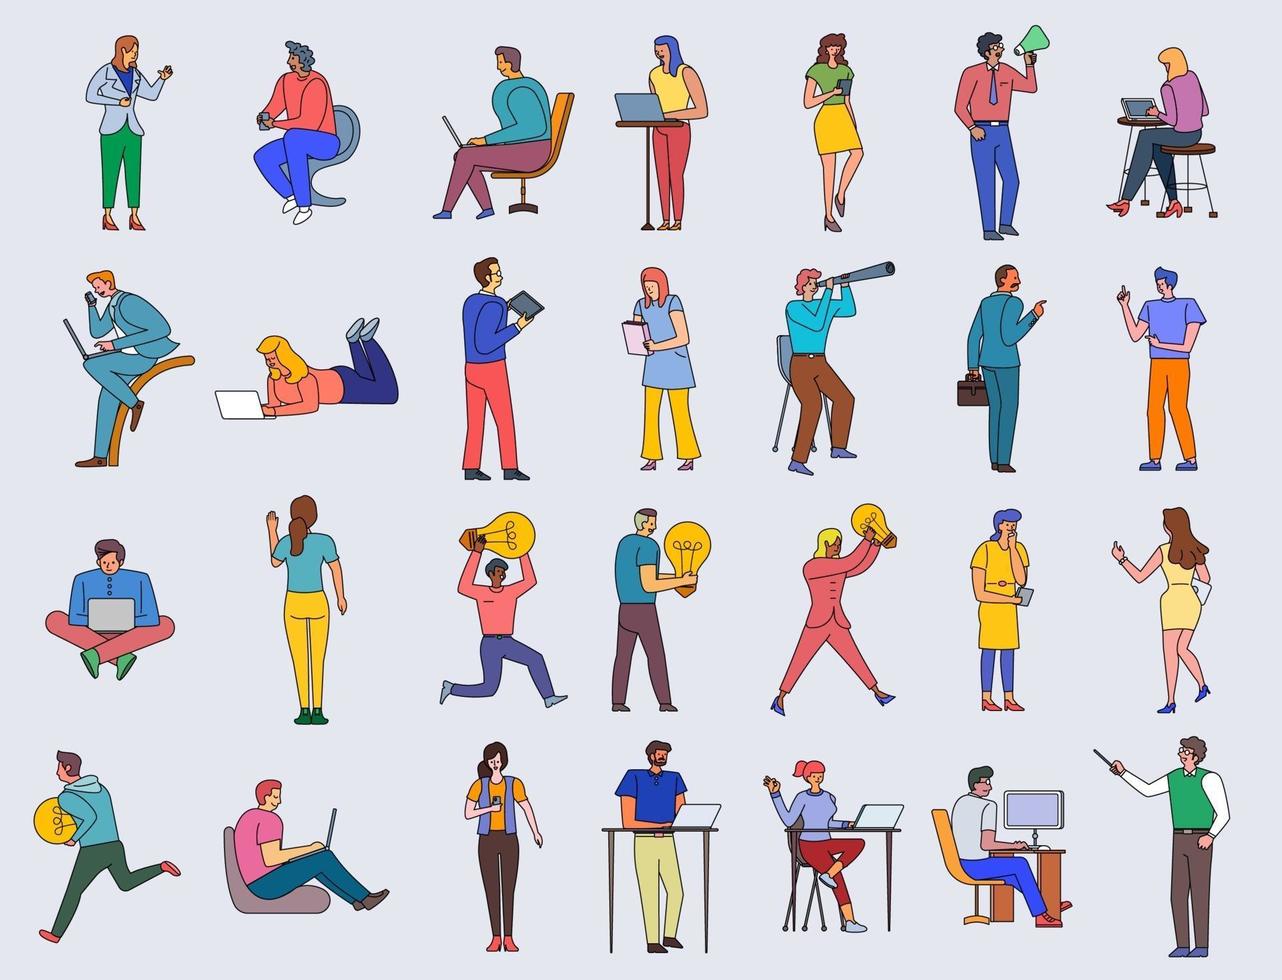 Flat style people in various business poses and actions vector